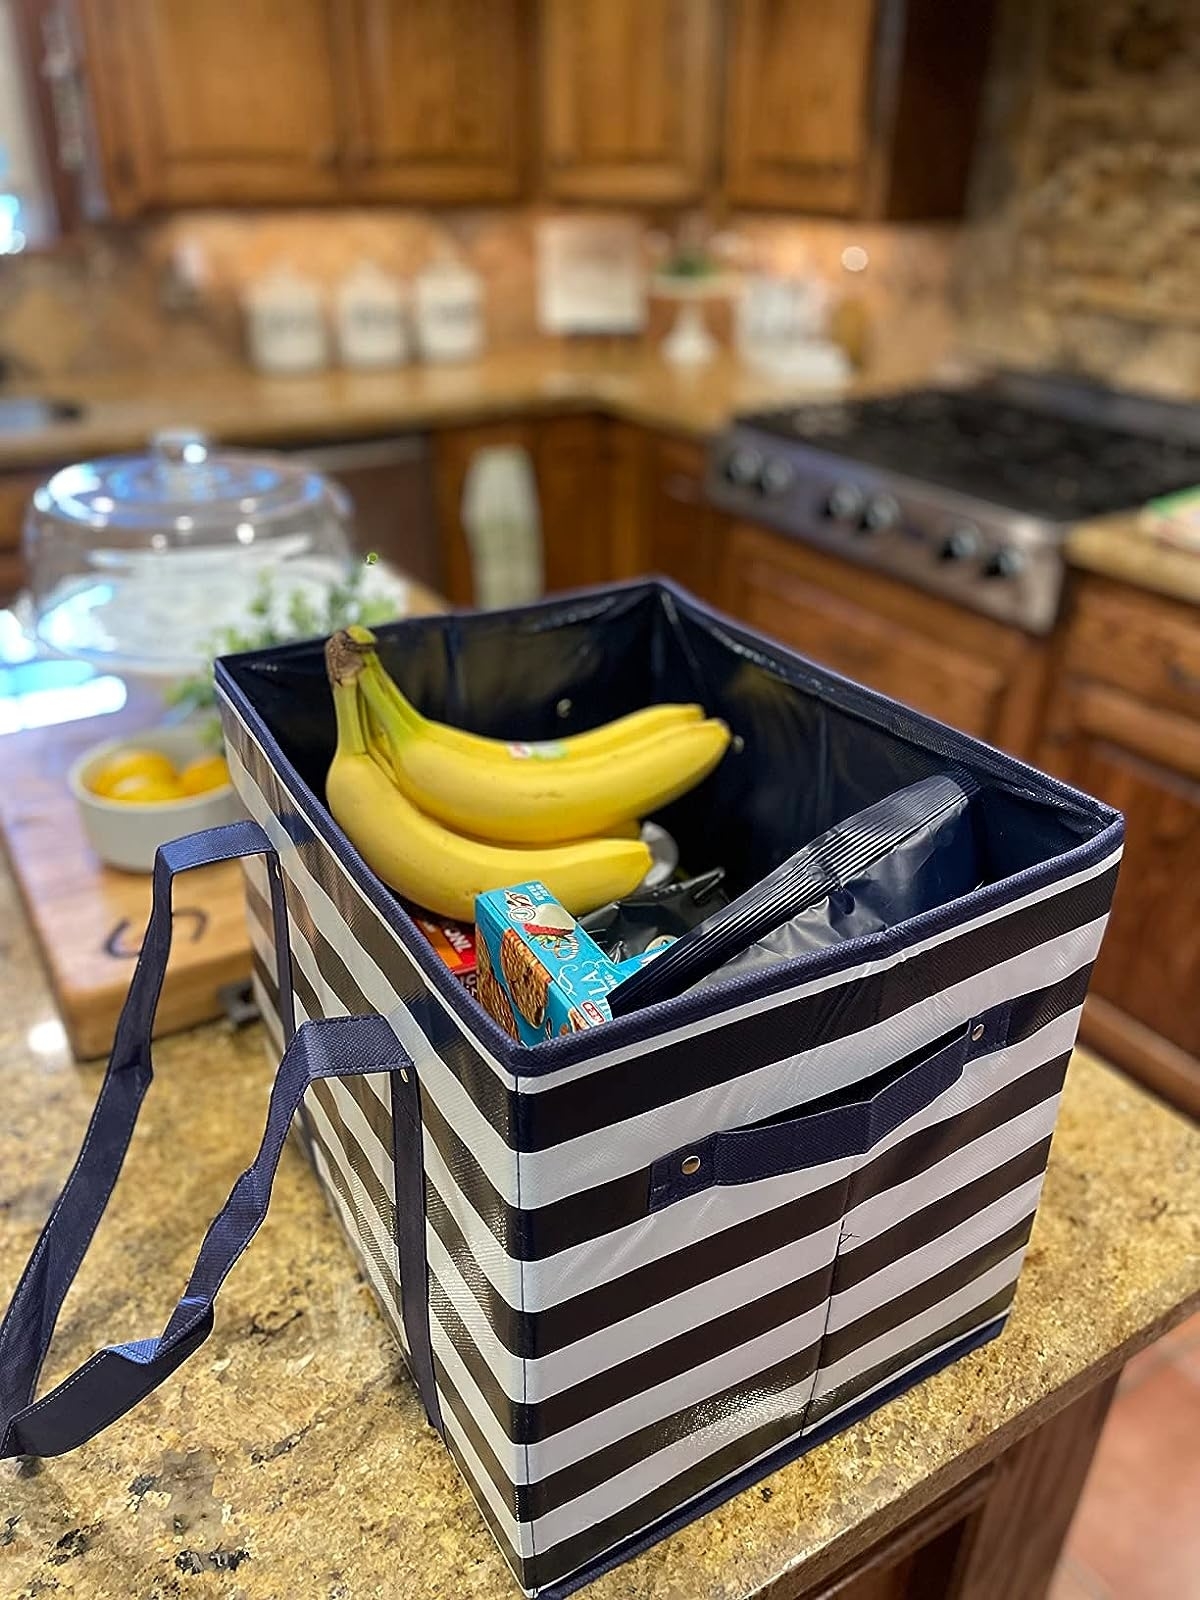 Reviewer image of the striped bag with groceries in it on their countertop